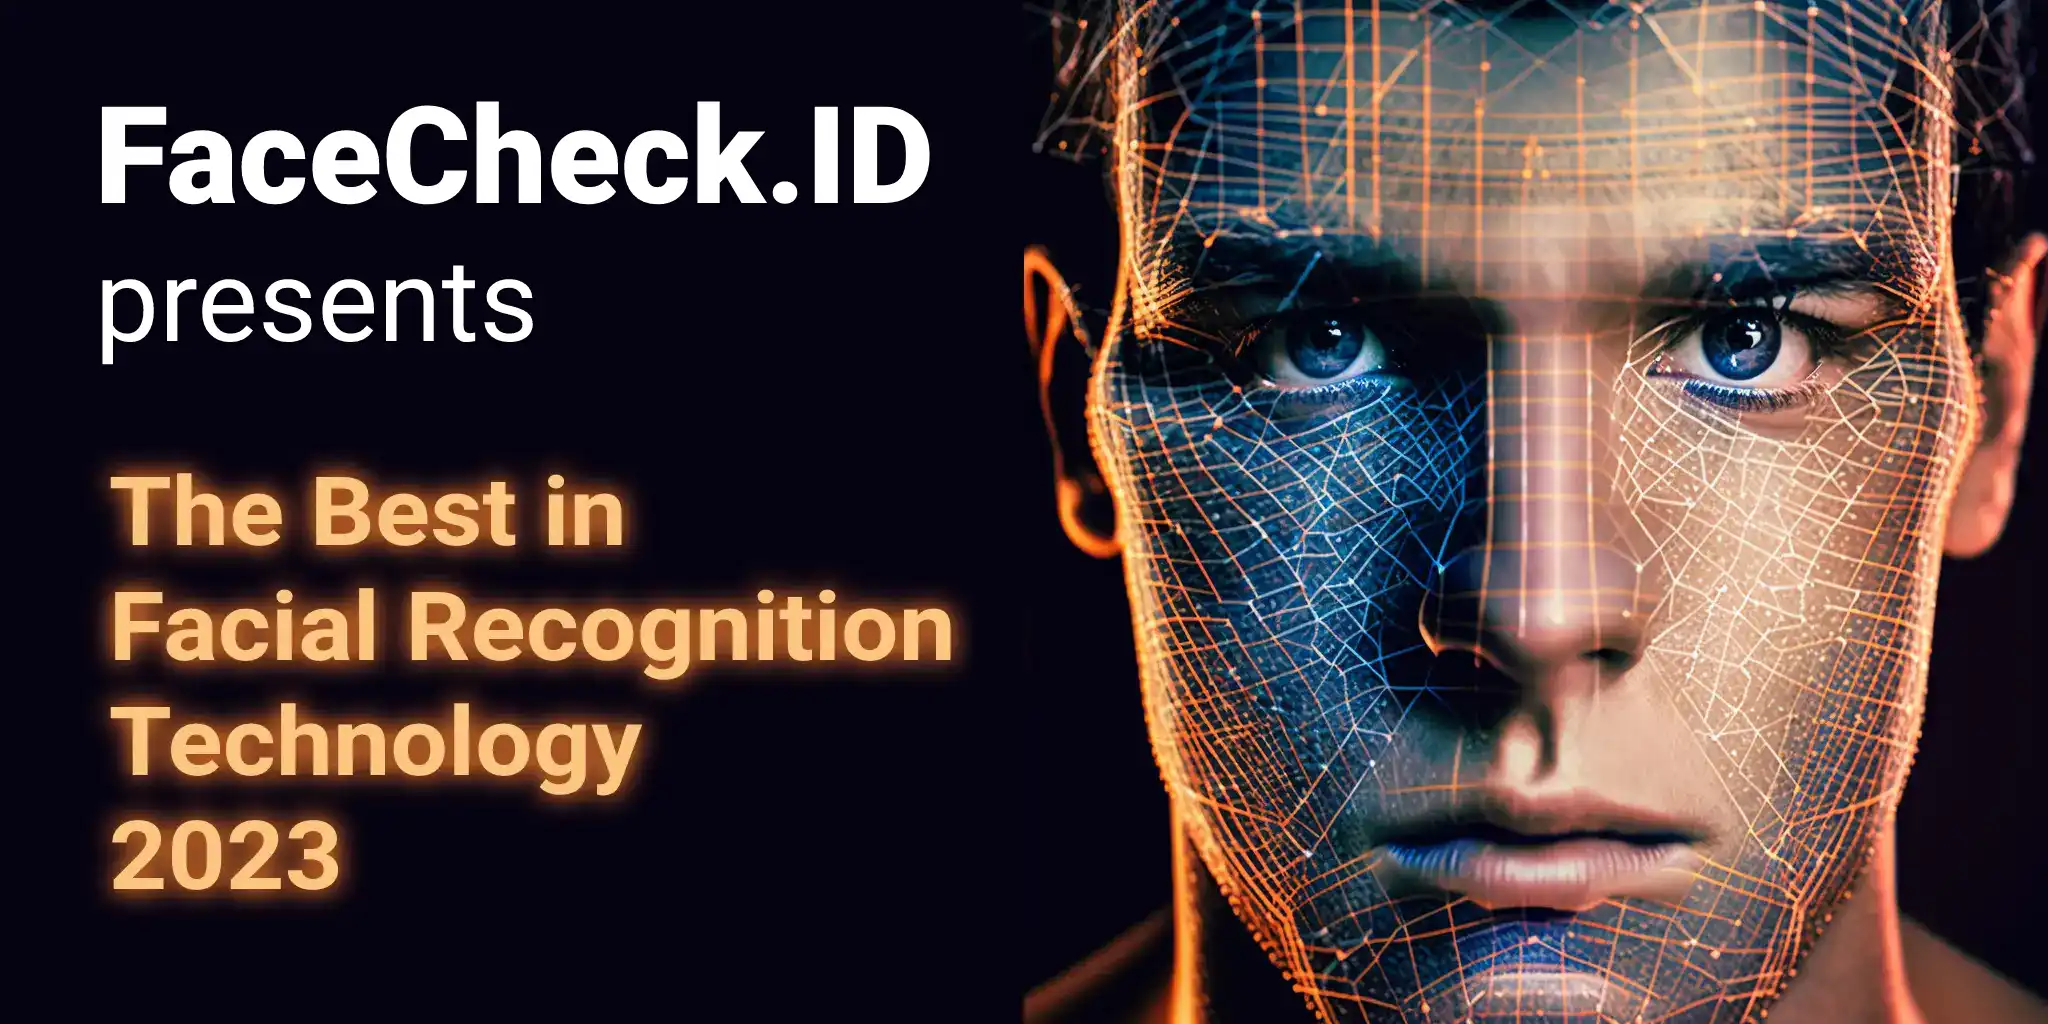 Examining the State-of-the-Art in Facial Recognition Algorithms for Unconstrained Environments